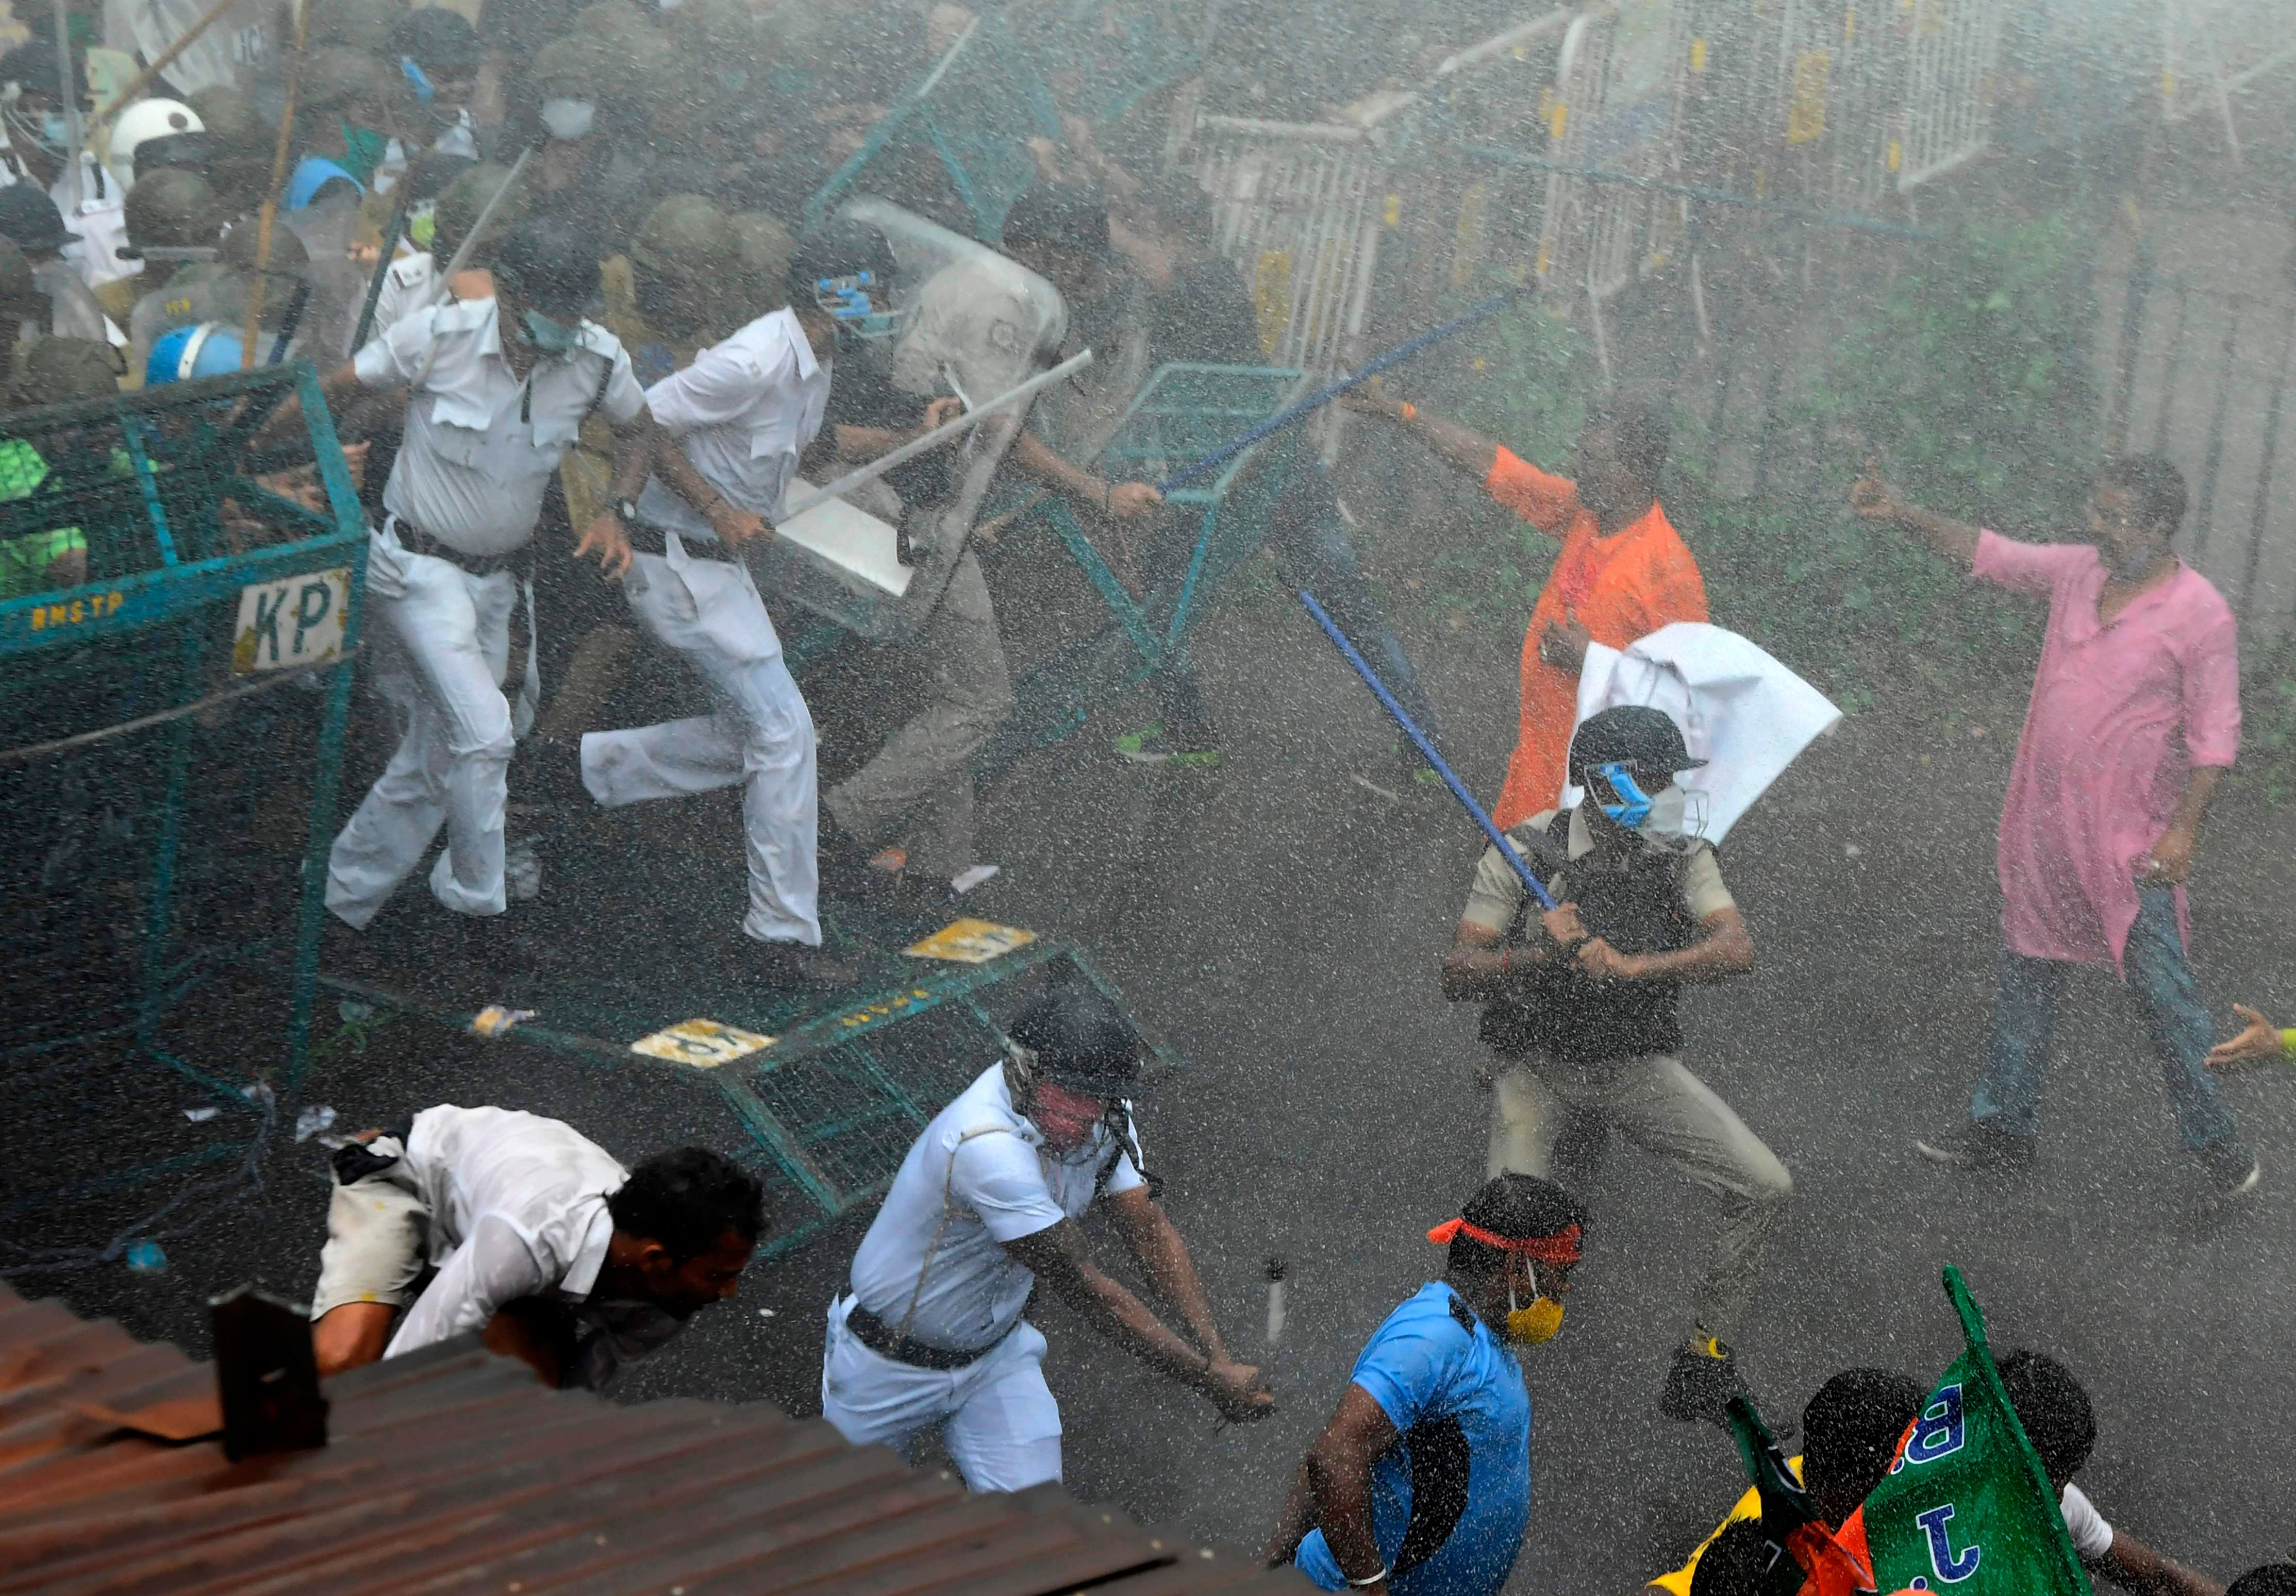 Police charge towards Bhartiya Janata Party (BJP) activists through a police barricade during a protest march towards West Bengal Chief Minister Mamata Banerjee's office to protest against the "worsening" law and order situation in the state, in Kolkata on October 8, 2020. Credit: AFP